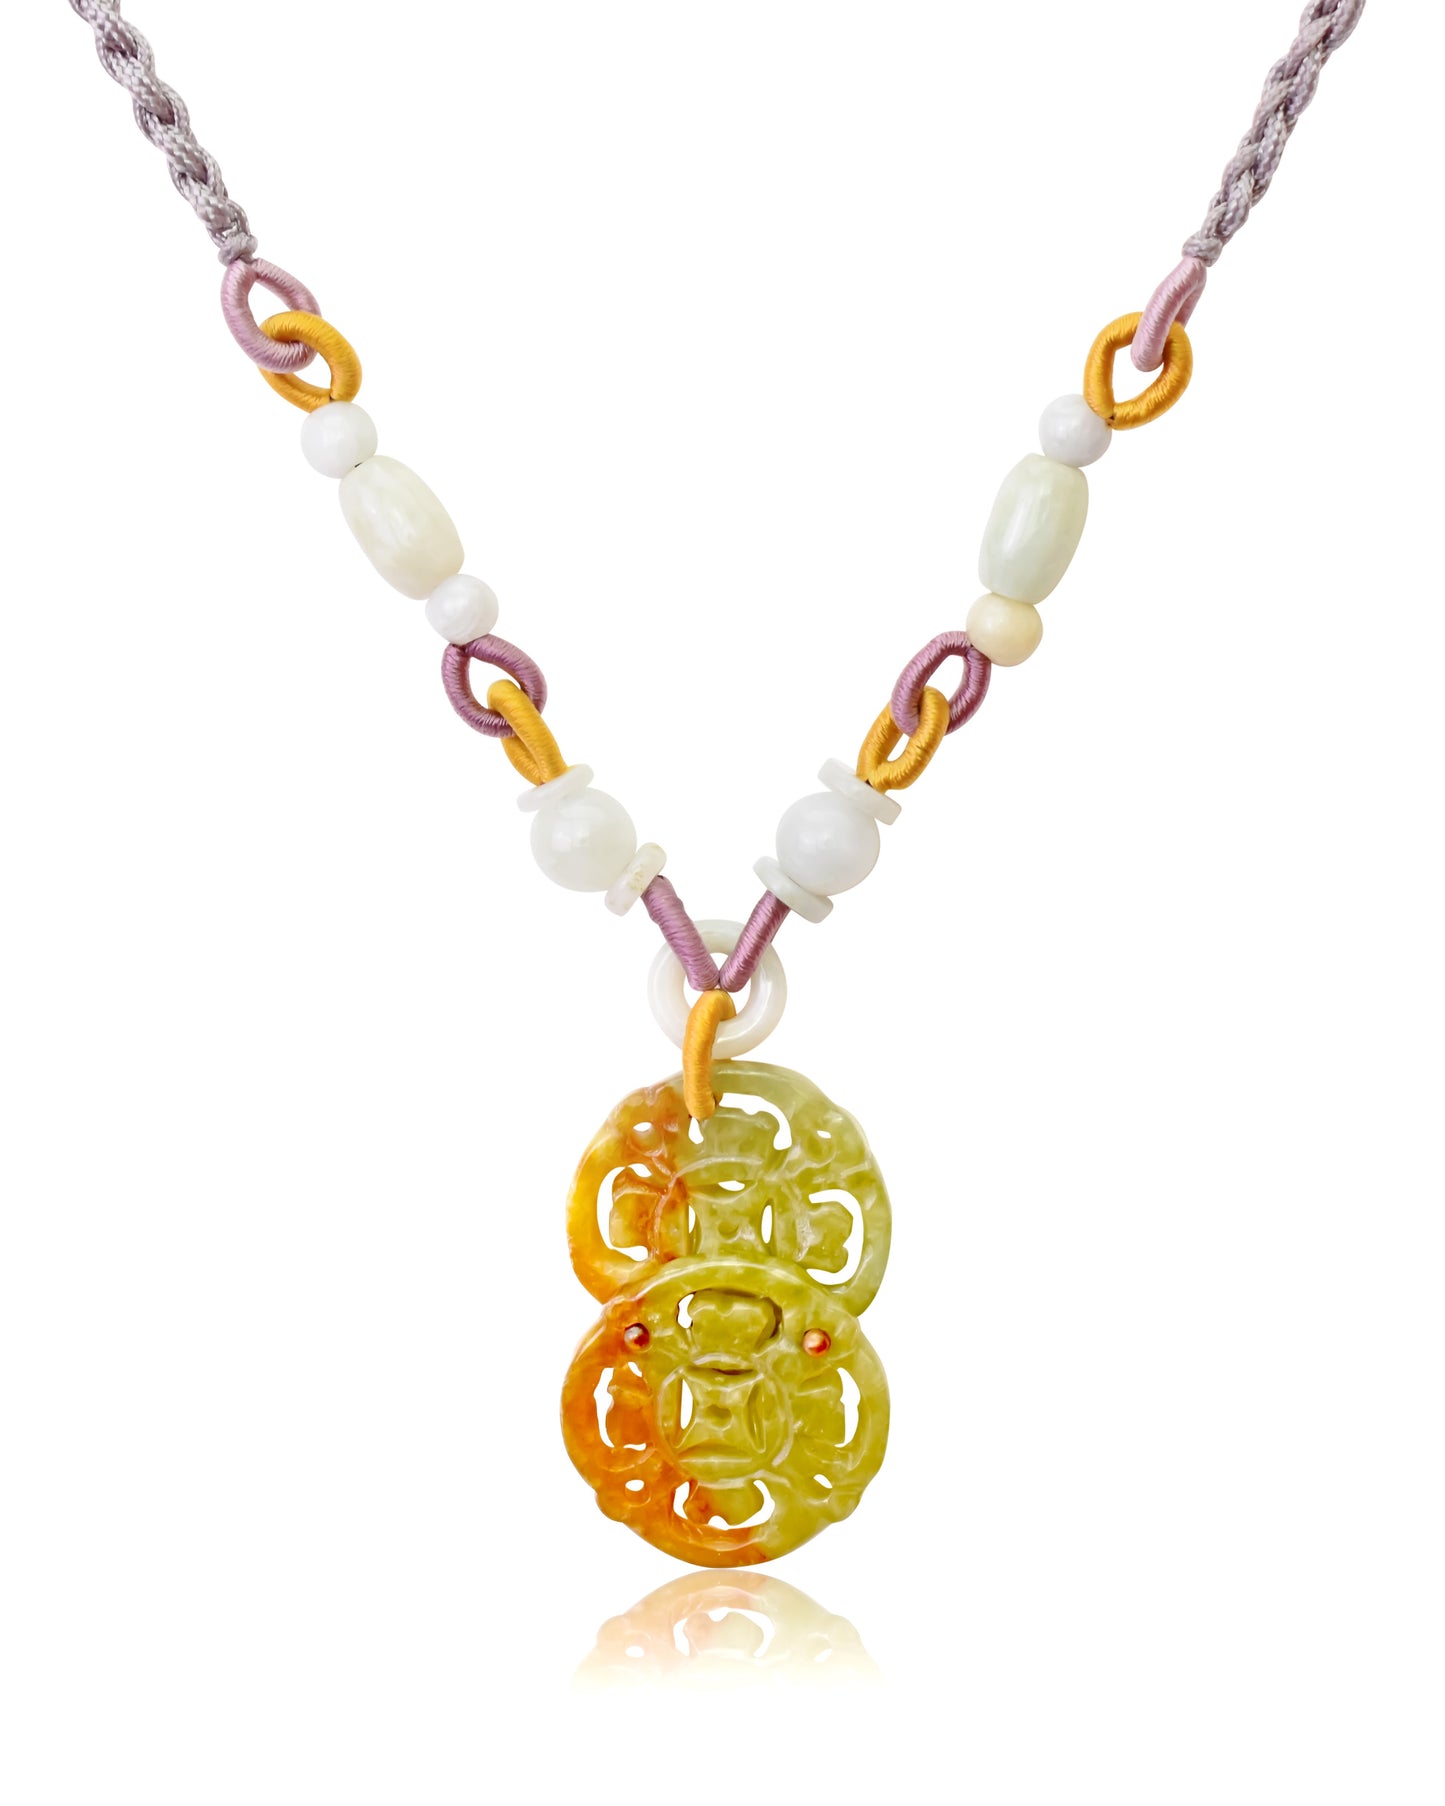 Get Rich Quick with Dynasty Double Gold Coin Jade Necklace